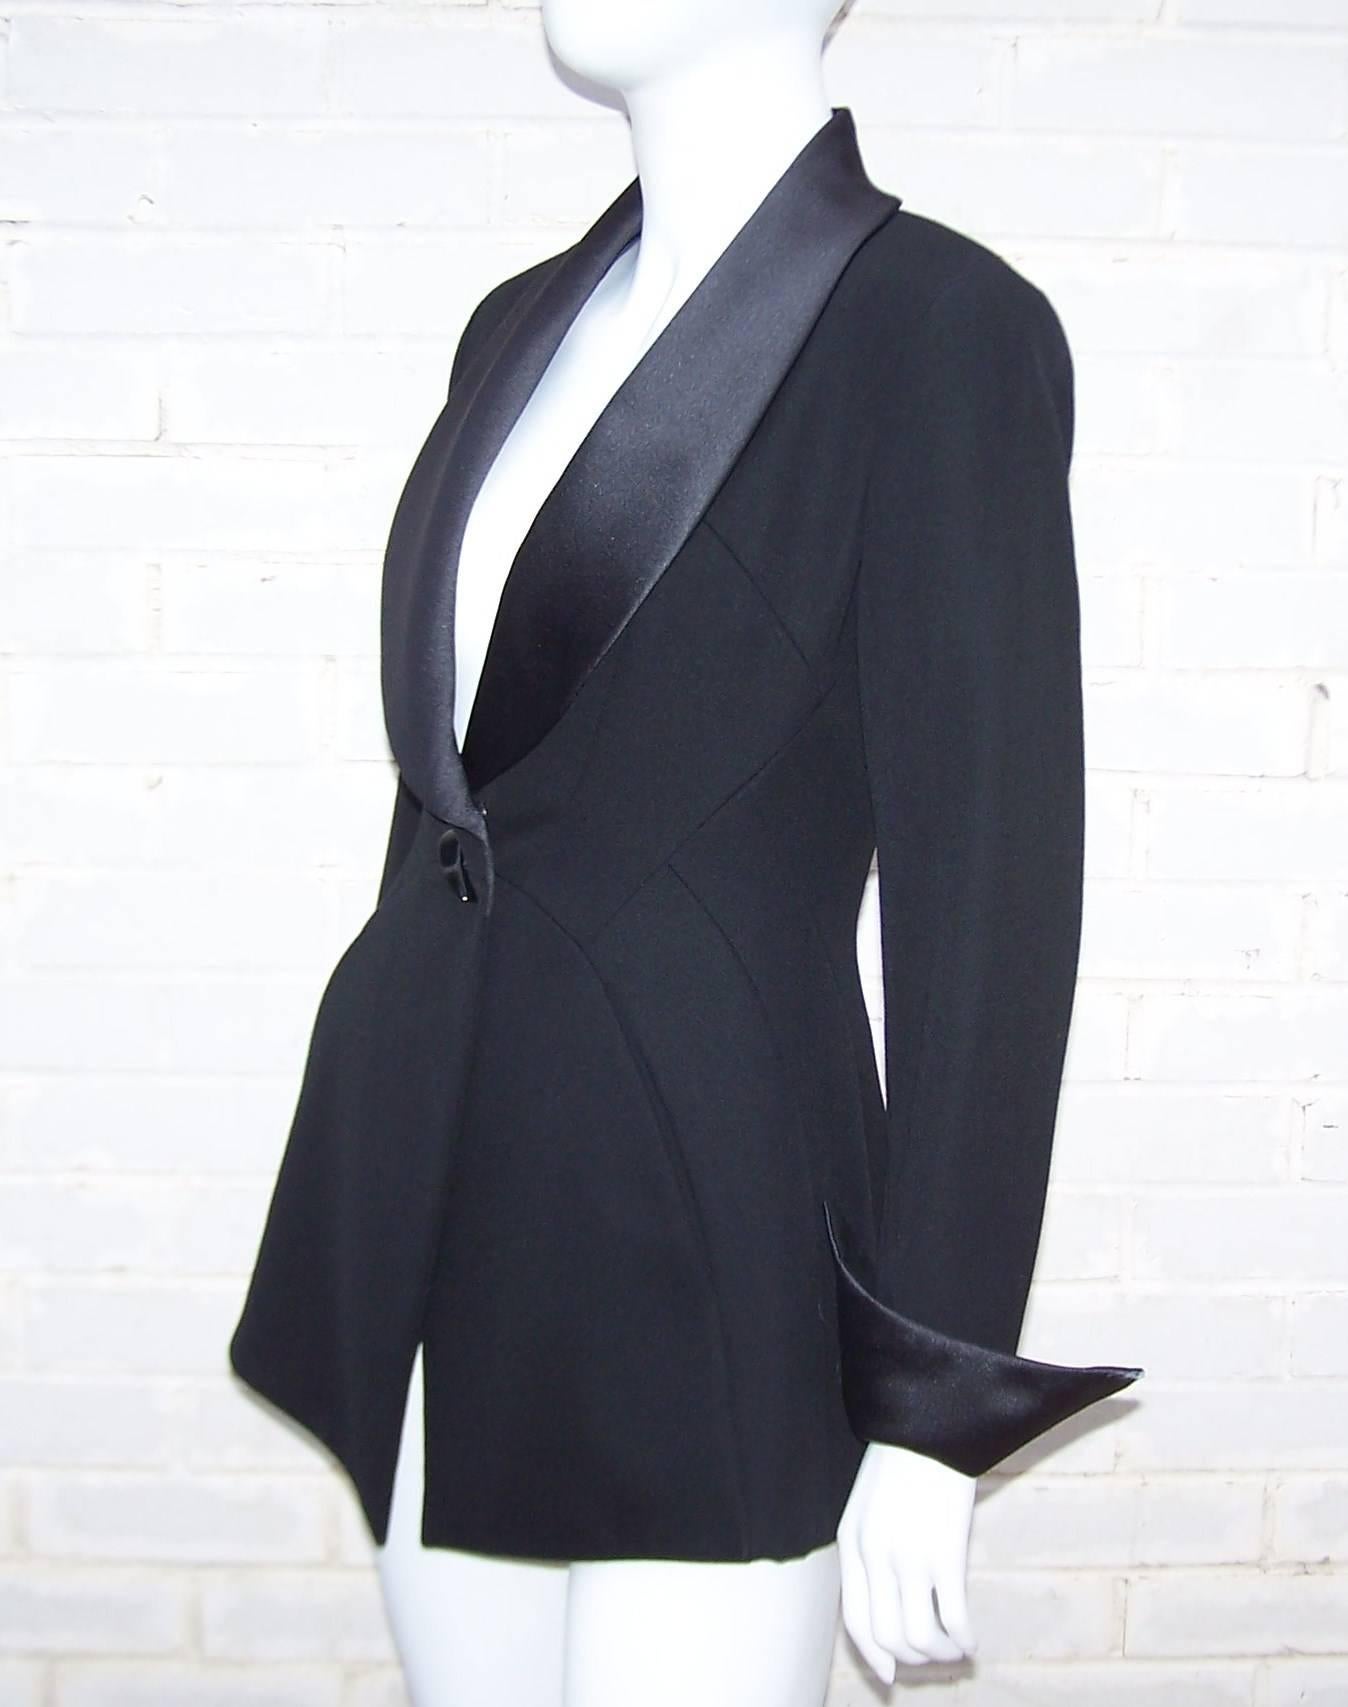 Black Androgynous 1980's Claude Montana Tuxedo Jacket With Satin Lapel and Cuffs